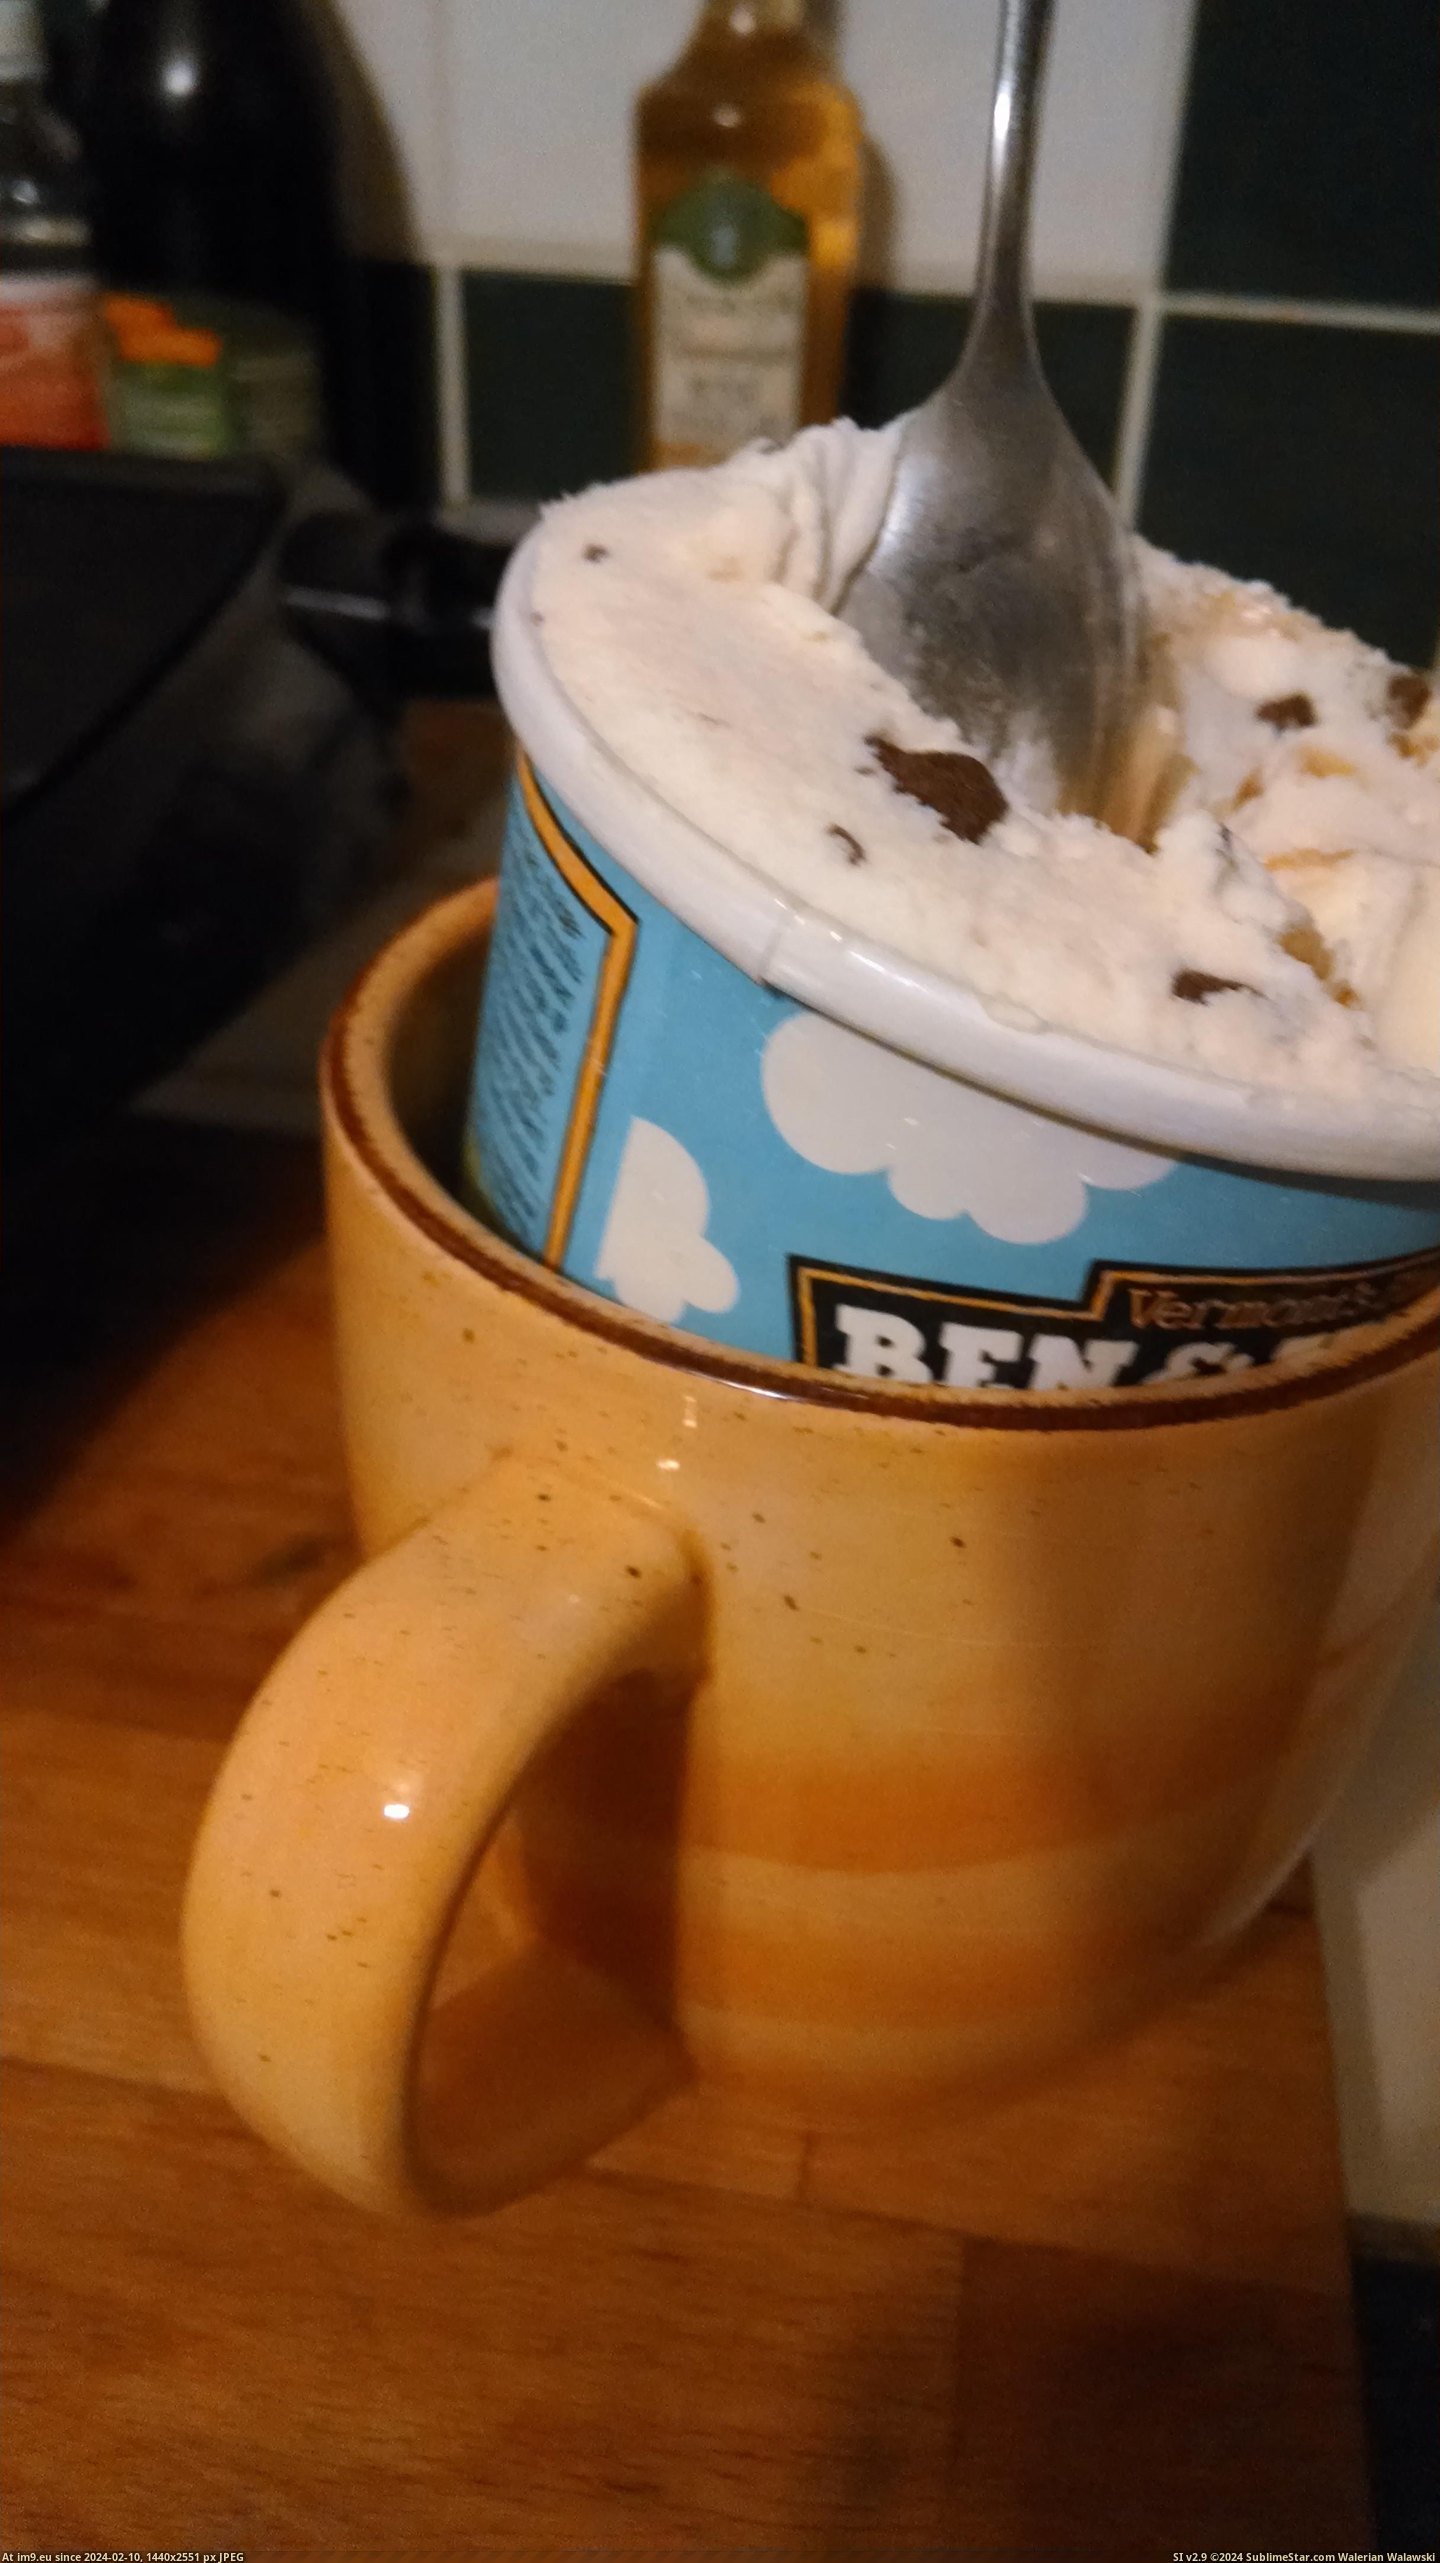 #Ice #Boyfriend #Mug #Promise #Cream #Cup [Pics] The mug I use when I promise my boyfriend I'll only have a cup of ice cream. 3 Pic. (Image of album My r/PICS favs))